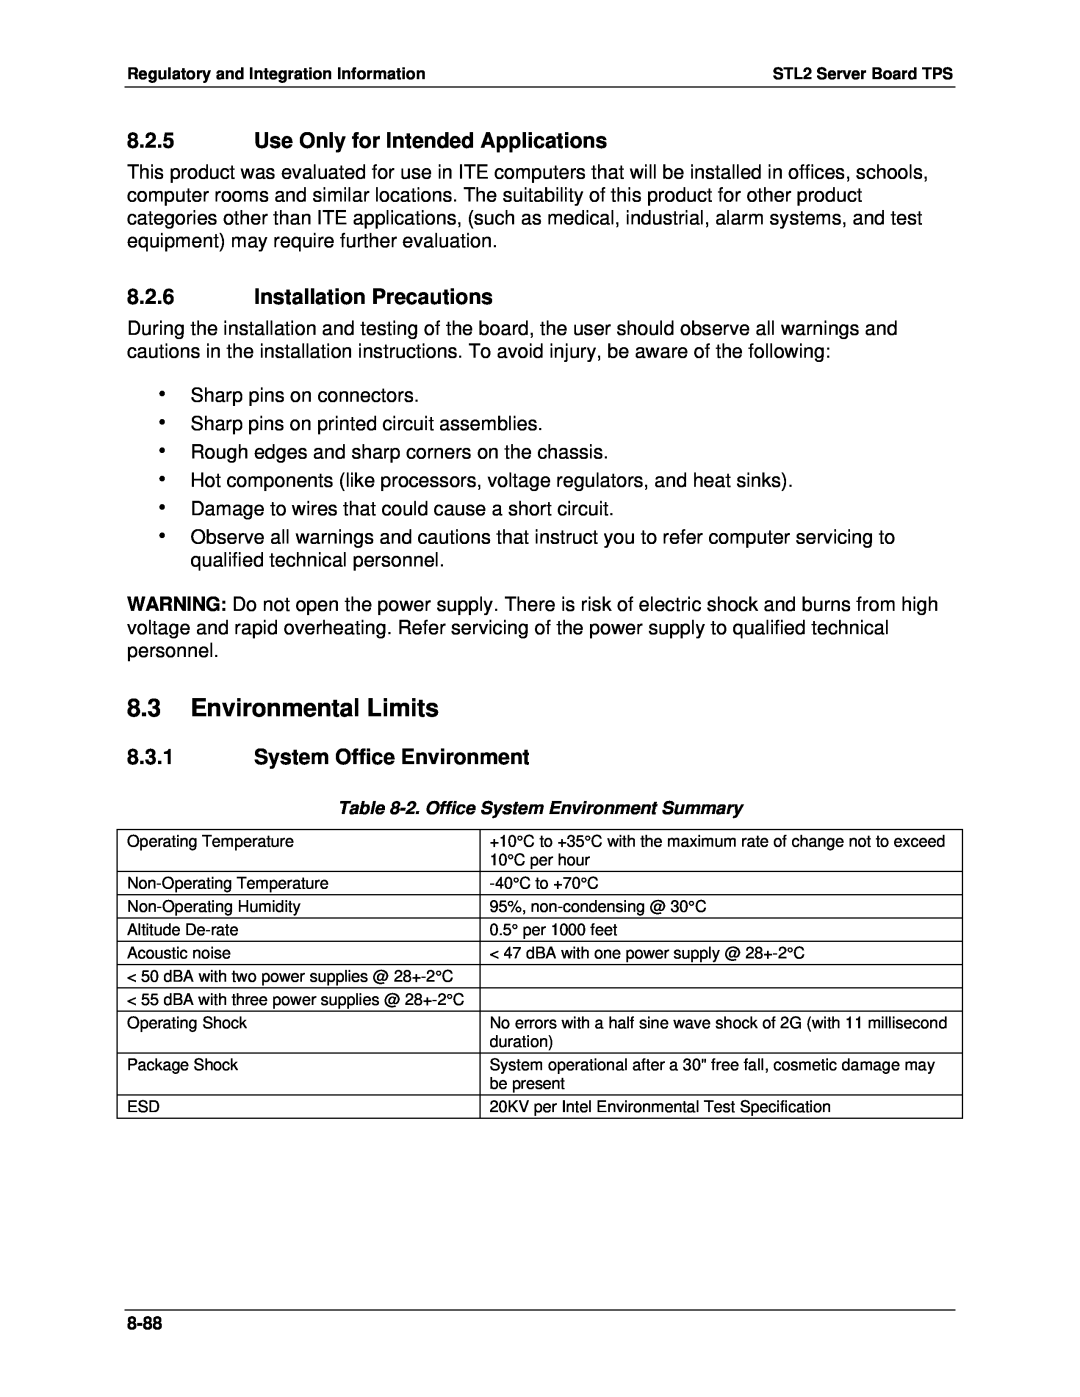 Intel STL2 manual 8.3Environmental Limits, 8.2.5Use Only for Intended Applications, 8.2.6Installation Precautions 